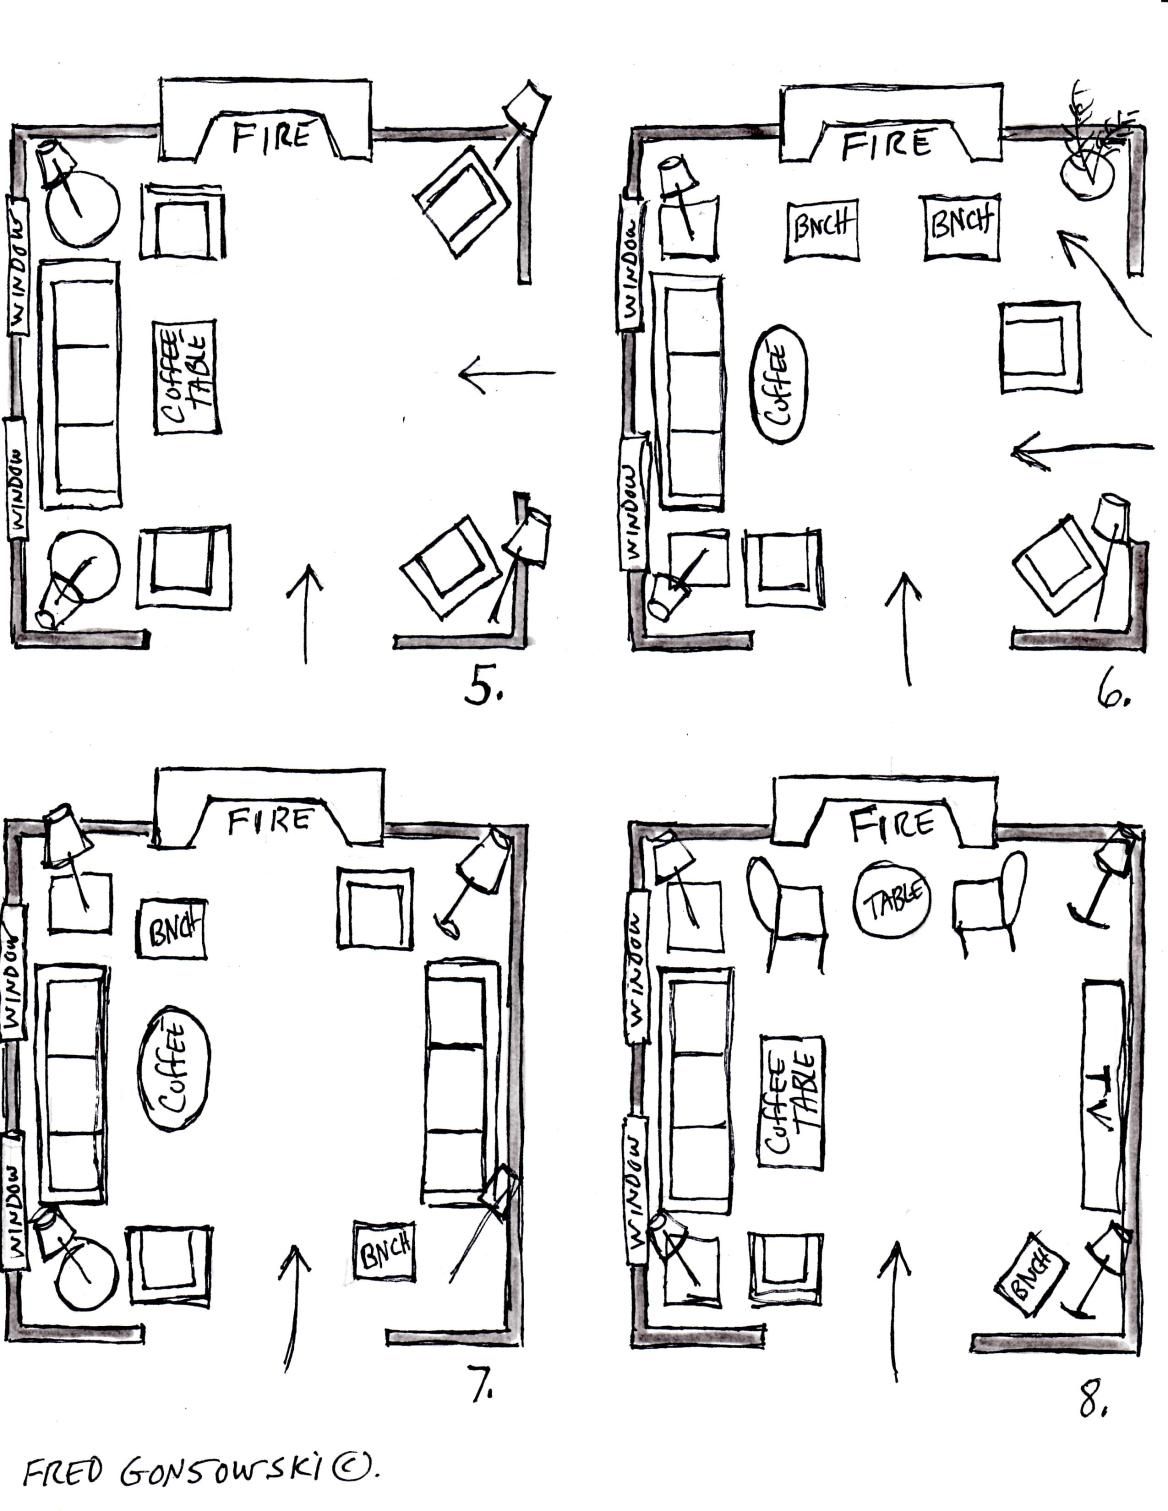 Furniture placement floor plan for square living room